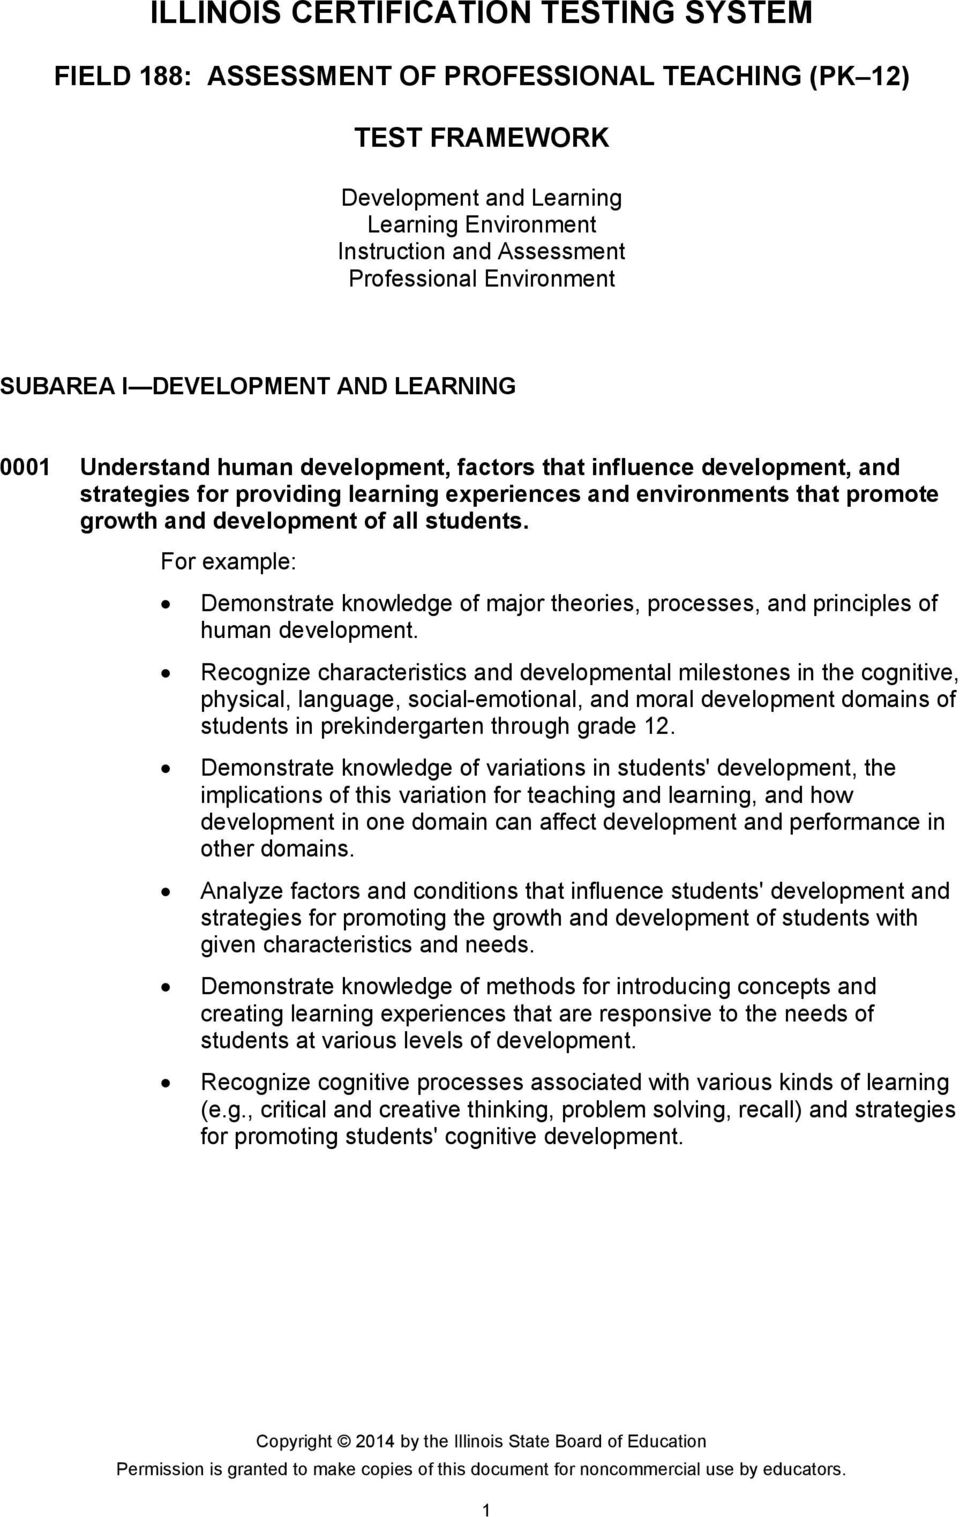 development of all students. Demonstrate knowledge of major theories, processes, and principles of human development.